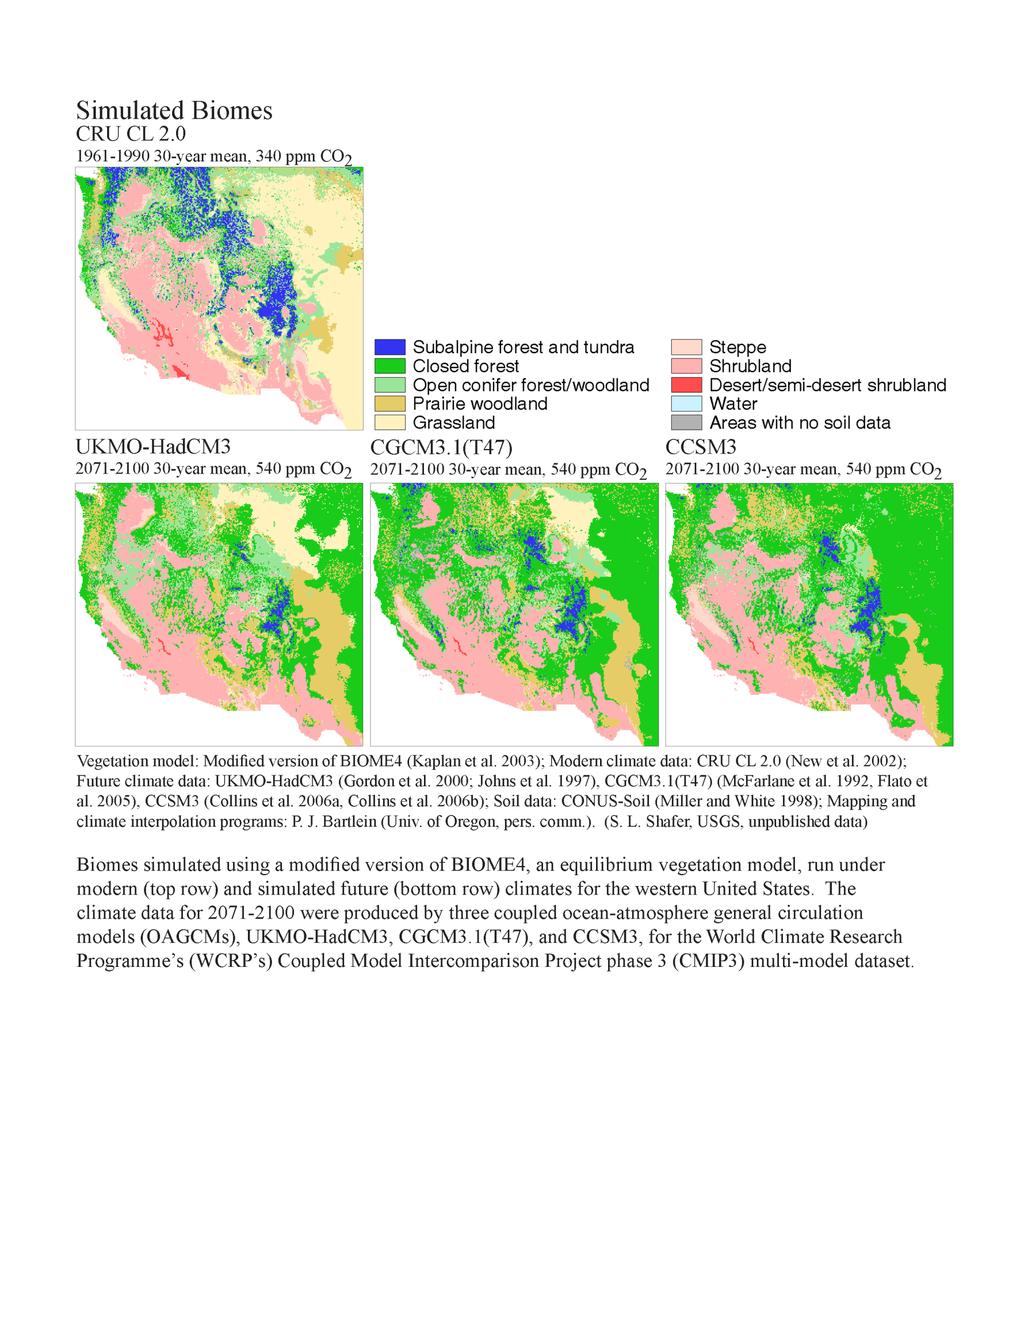 33 of dry forests and woodlands into the sagebrush steppe and grasslands, and 3) the resulting contraction of sagebrush steppe and grasslands (e.g., Hansen et al. 2001).